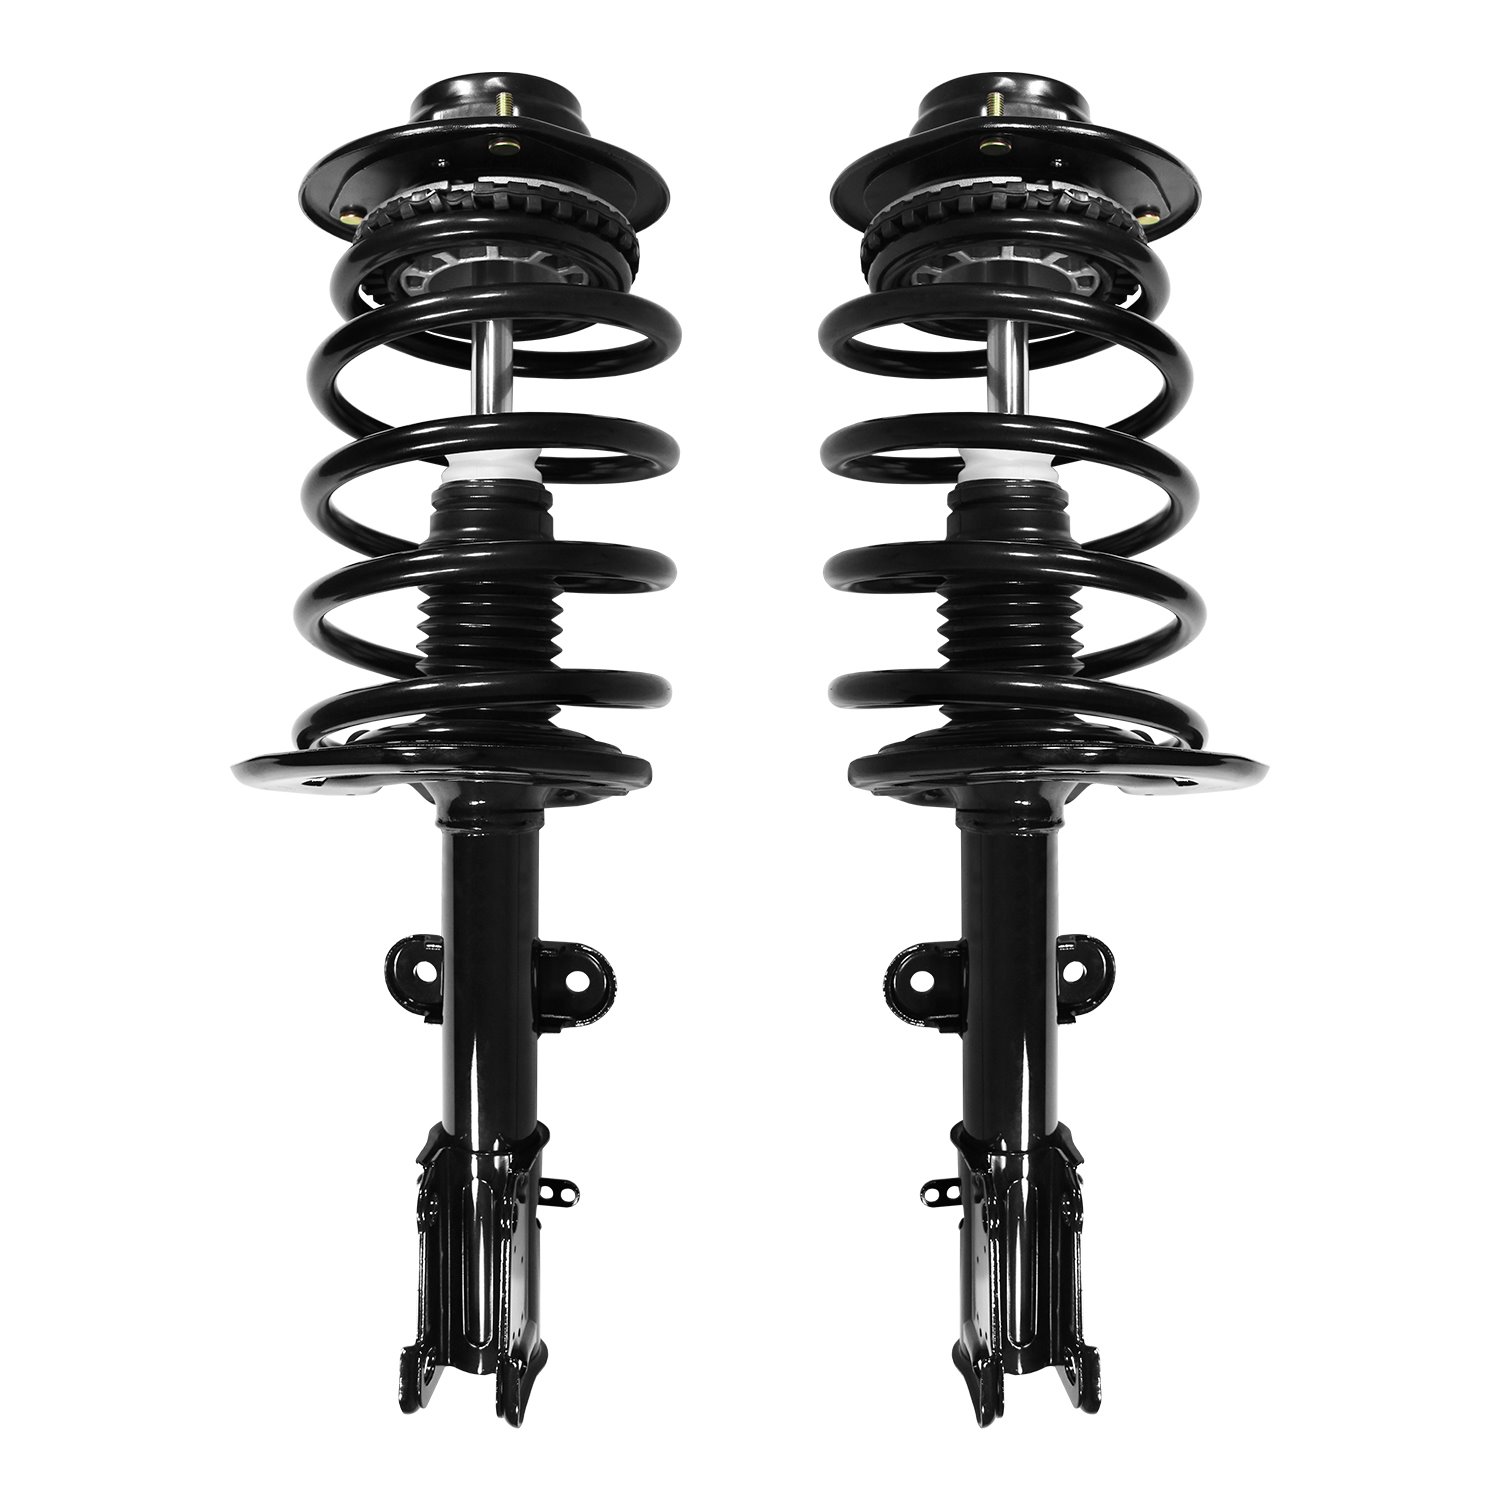 2-11173-11174-001 Suspension Strut & Coil Spring Assembly Set Fits Select Chrysler Pacifica